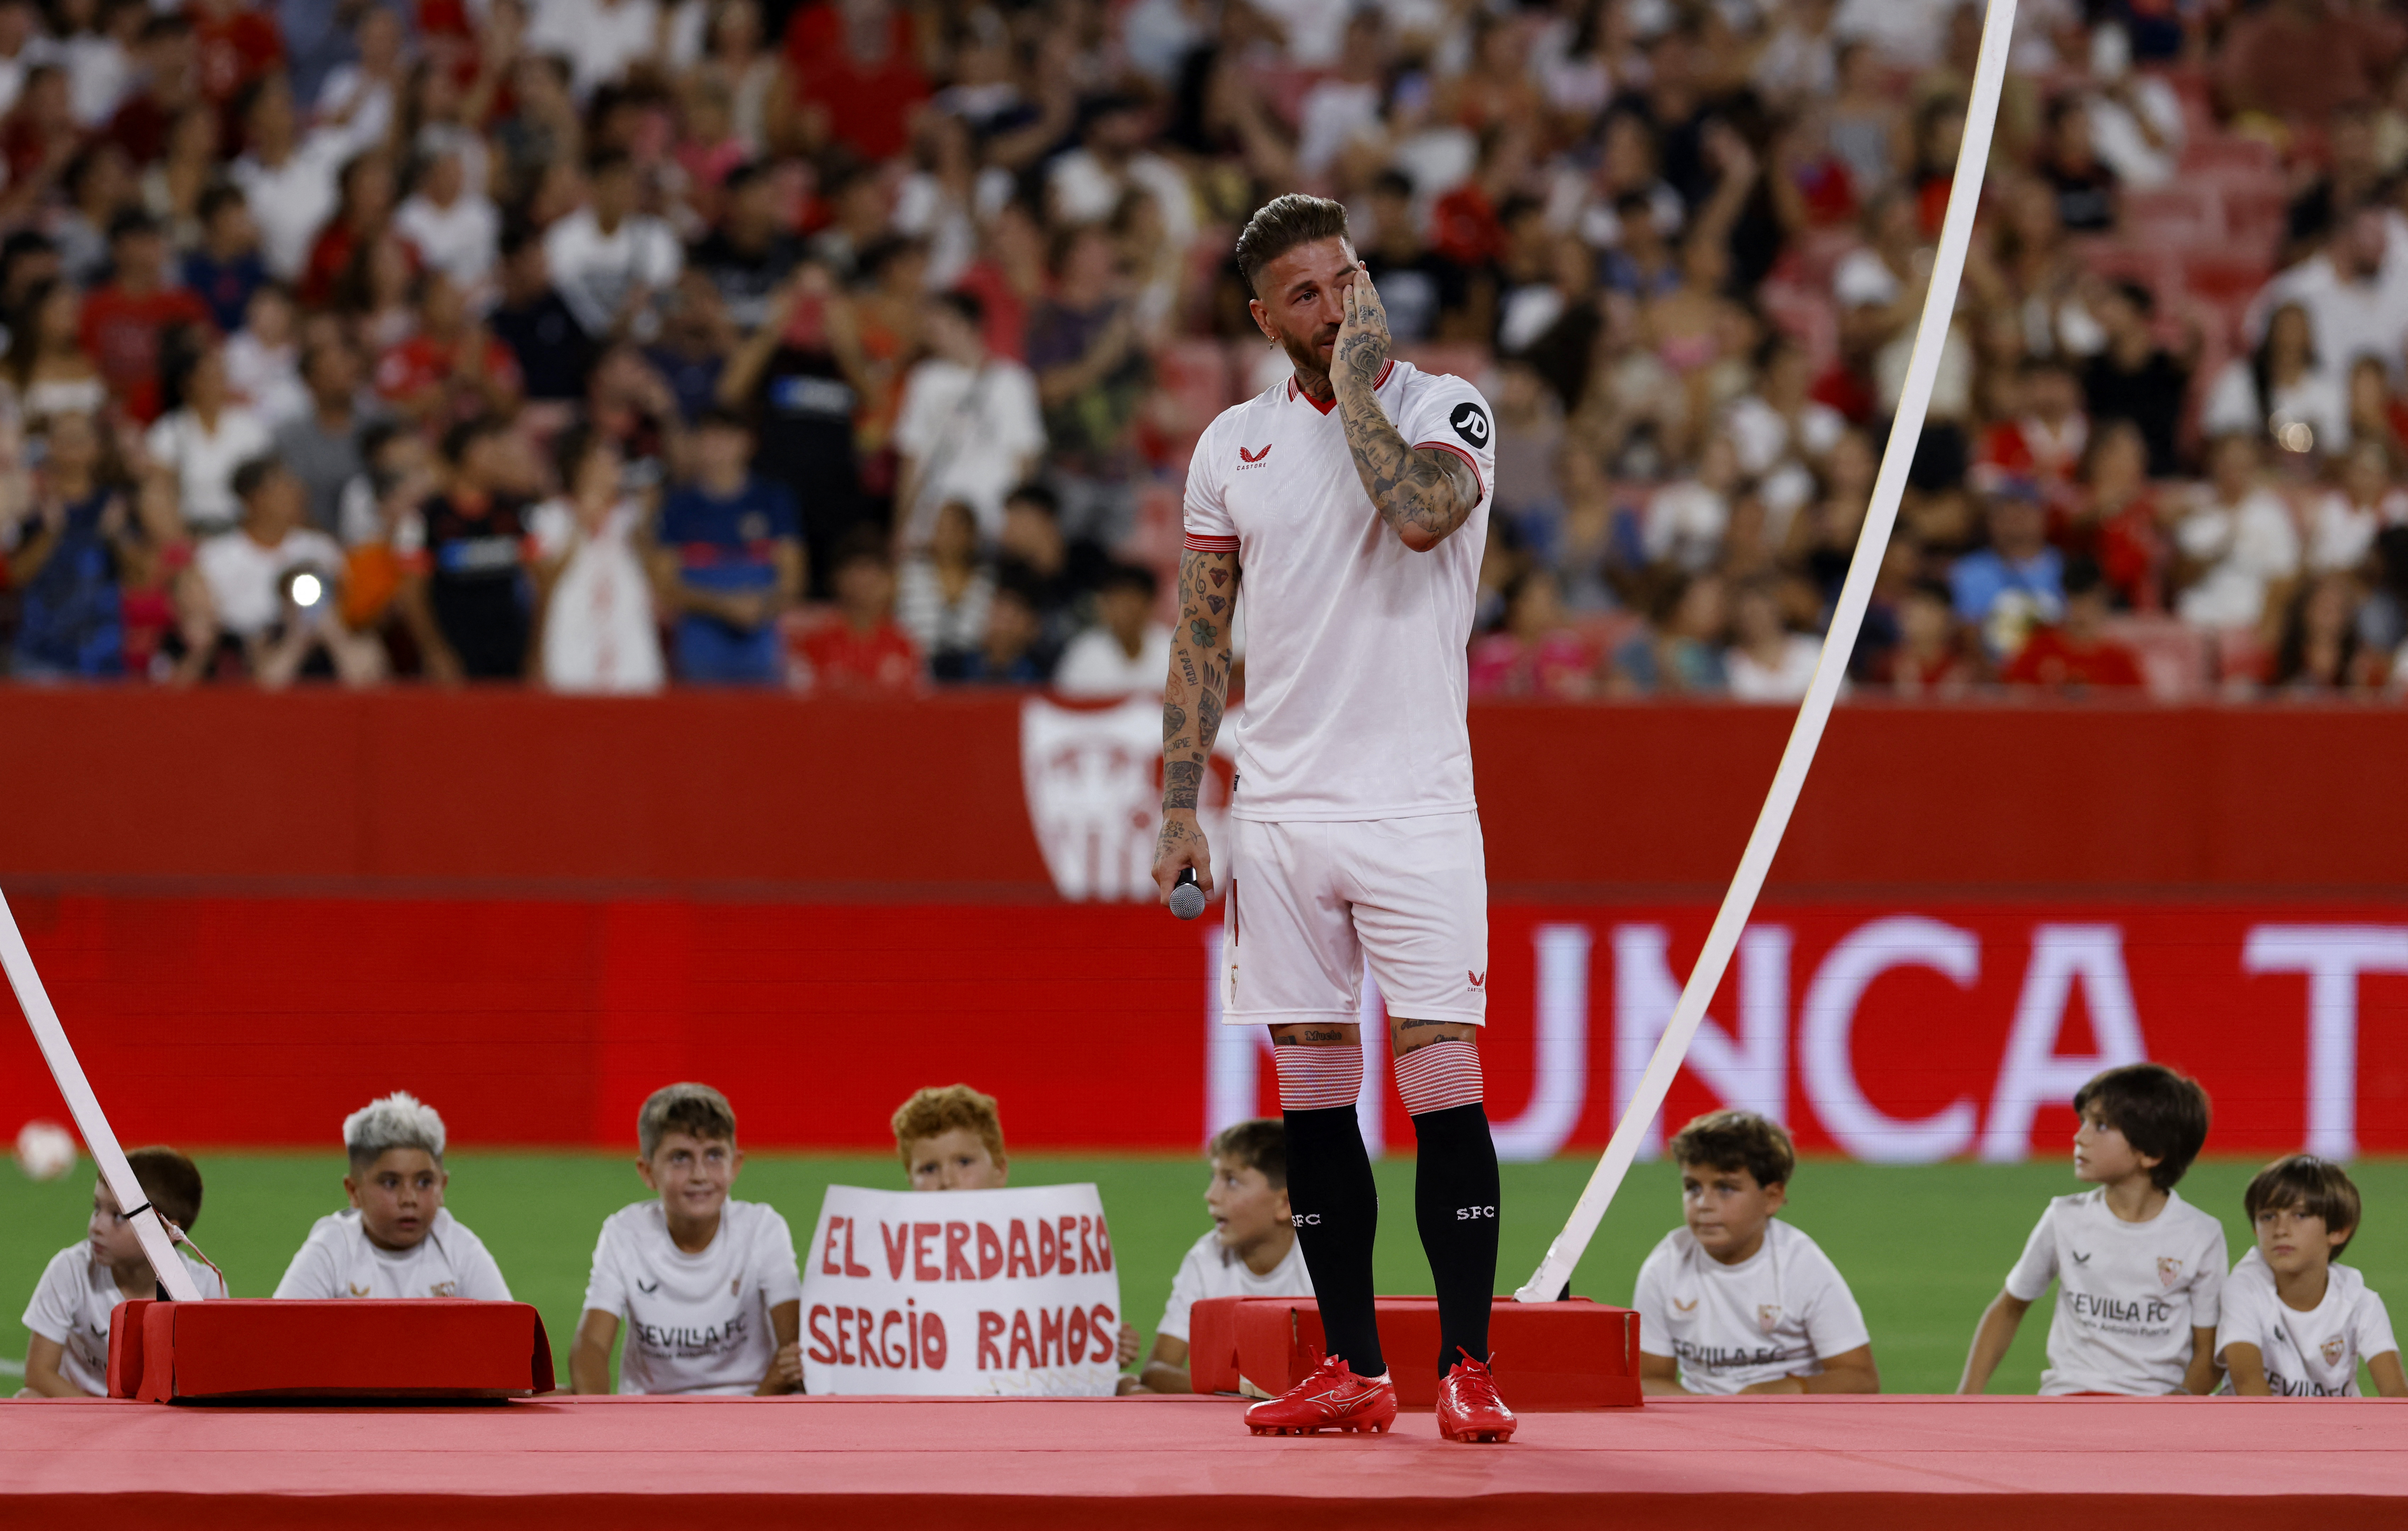 Sergio Ramos preparing for return to action with Sevilla - Get